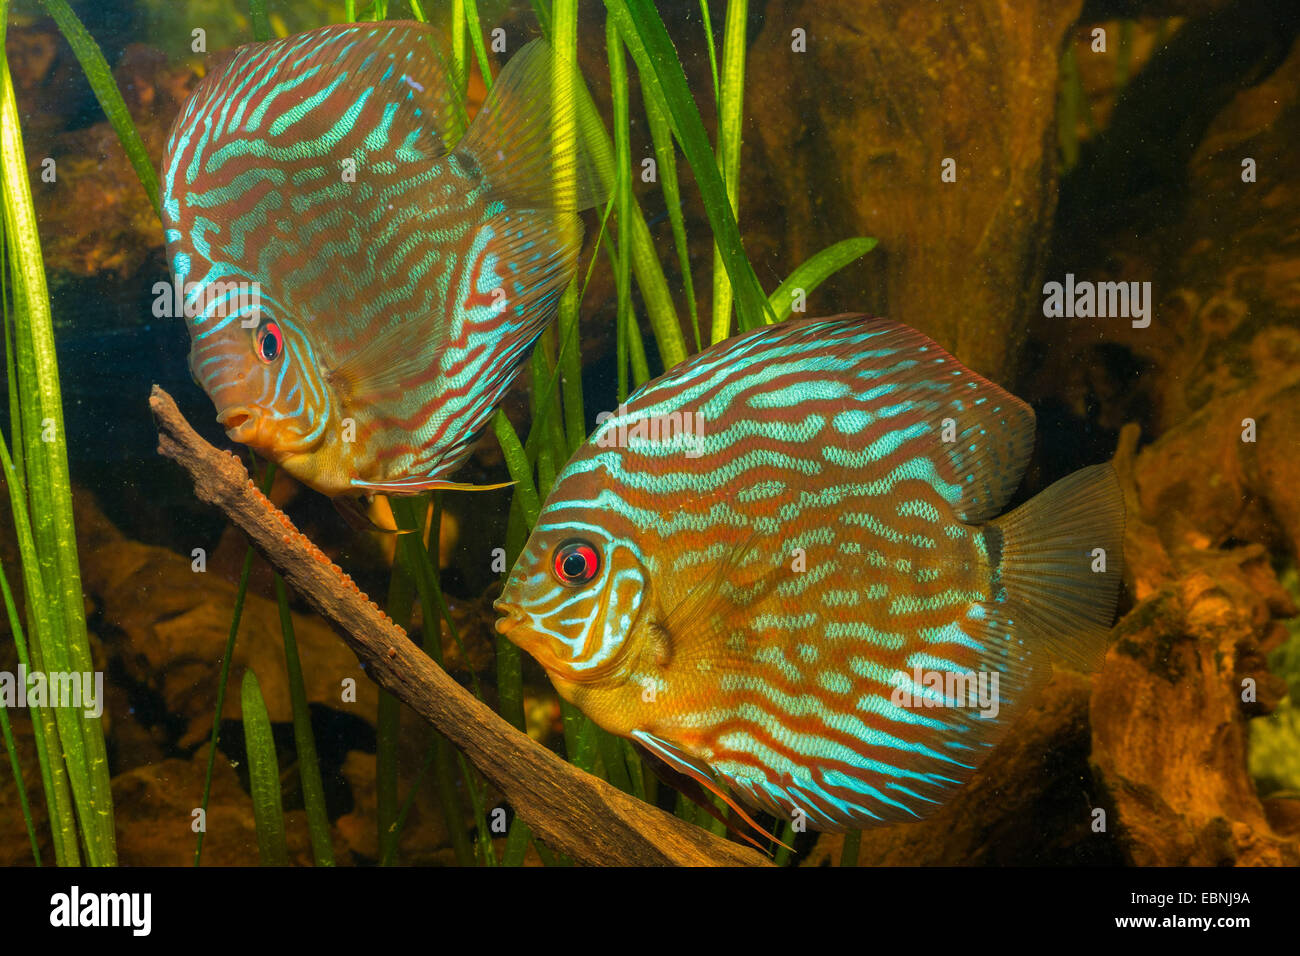 green discus (Symphysodon aequifasciata aequifasciata), laying eggs on a root Stock Photo